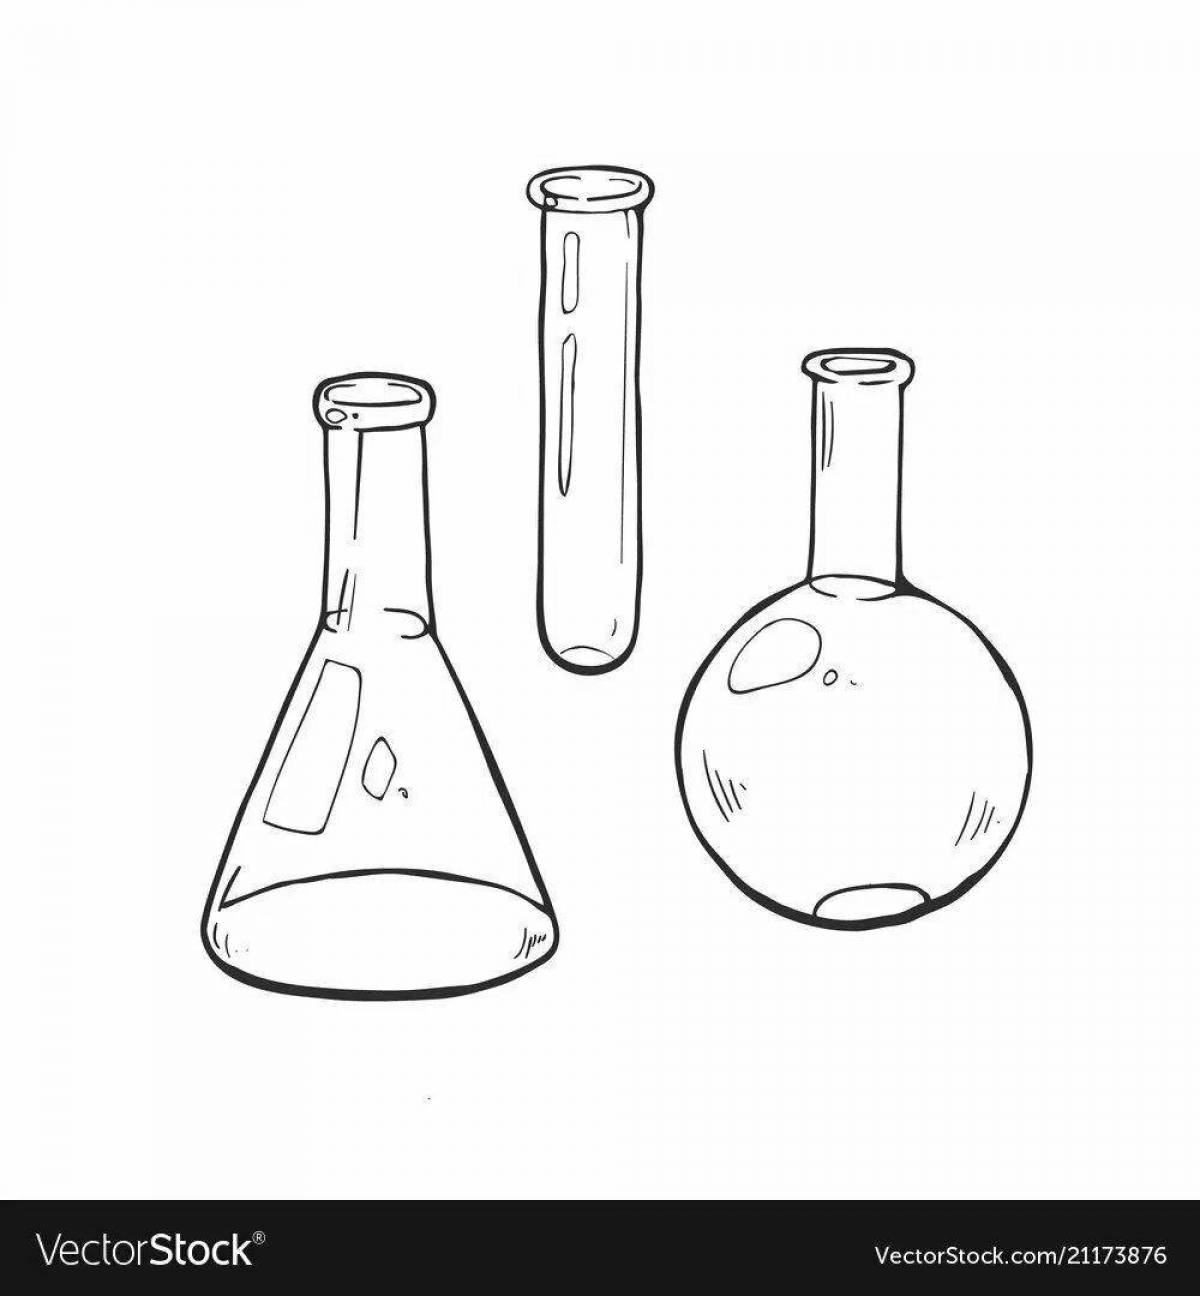 Coloring fine chemical flasks